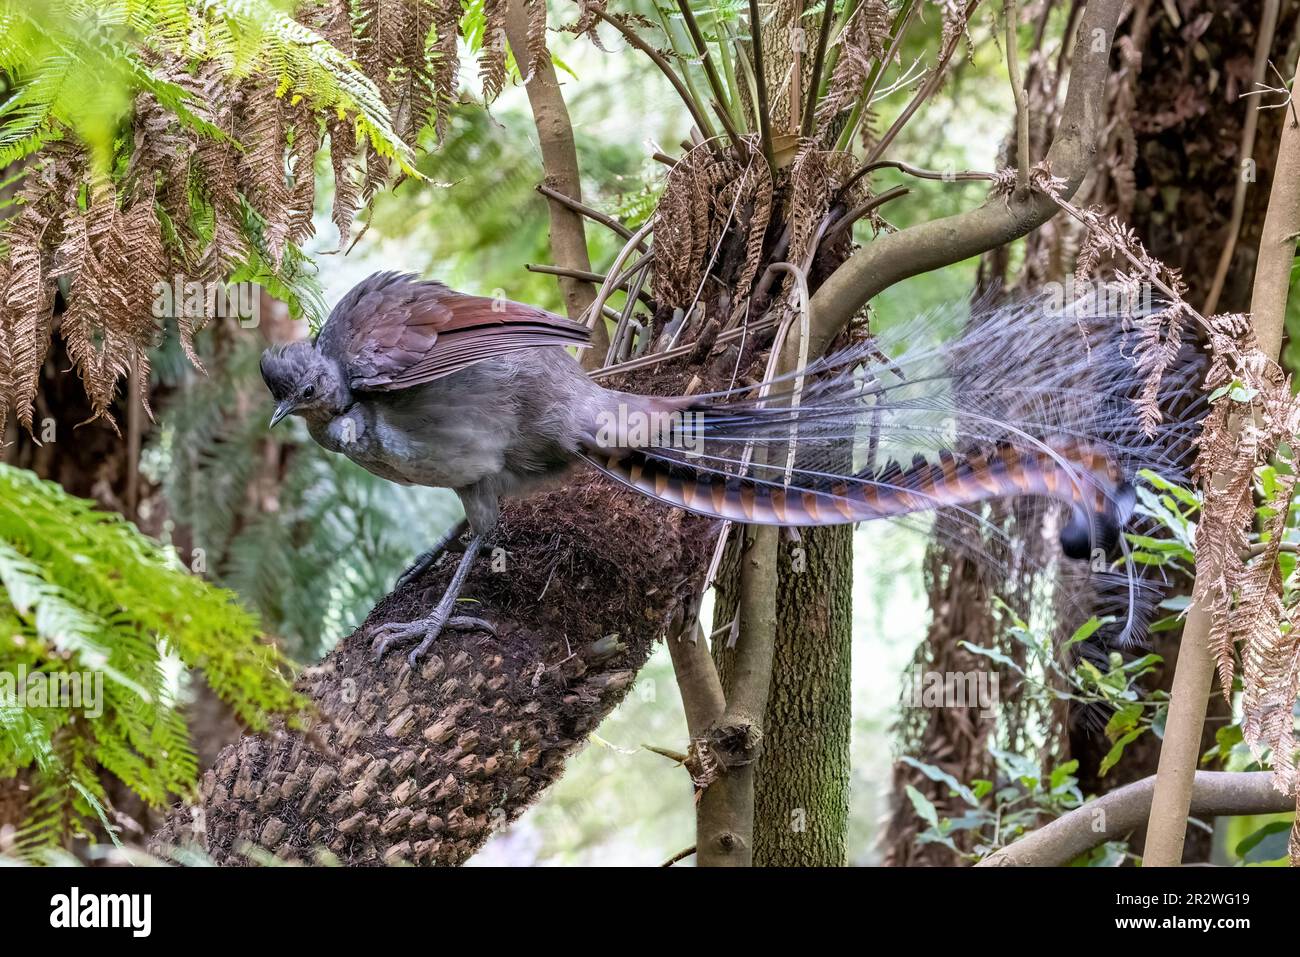 A superb lyrebird, Menura novaehollandiae, Victoria, Australia, perched on a tree fern. This is an adult male side view. Stock Photo